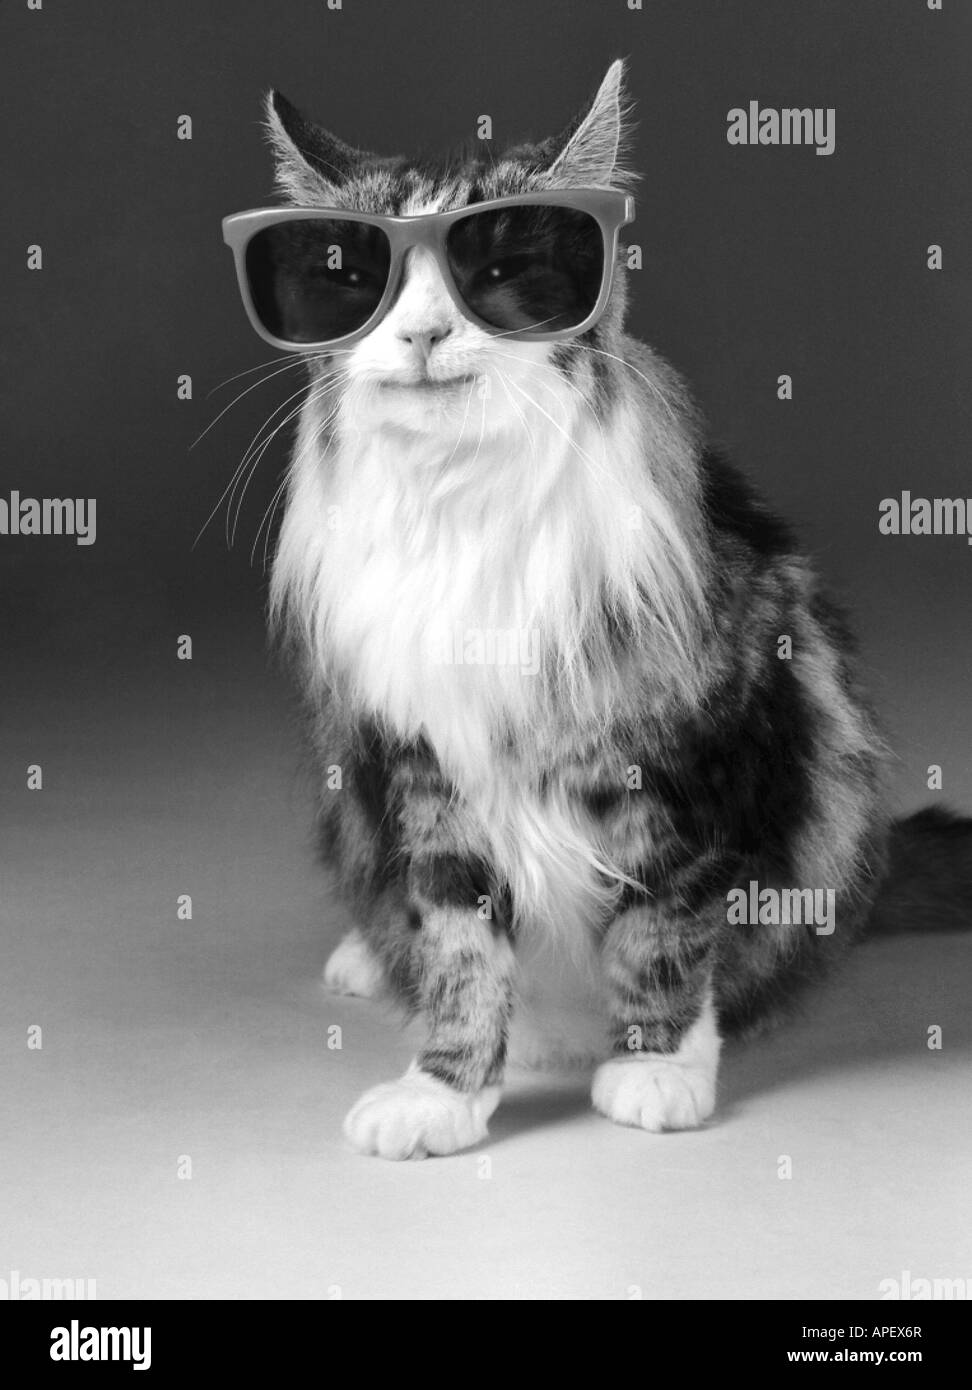 Cat, adult, (Calico?) black and white studio shot, wearing sunglasses, with apparent smile on face. Stock Photo